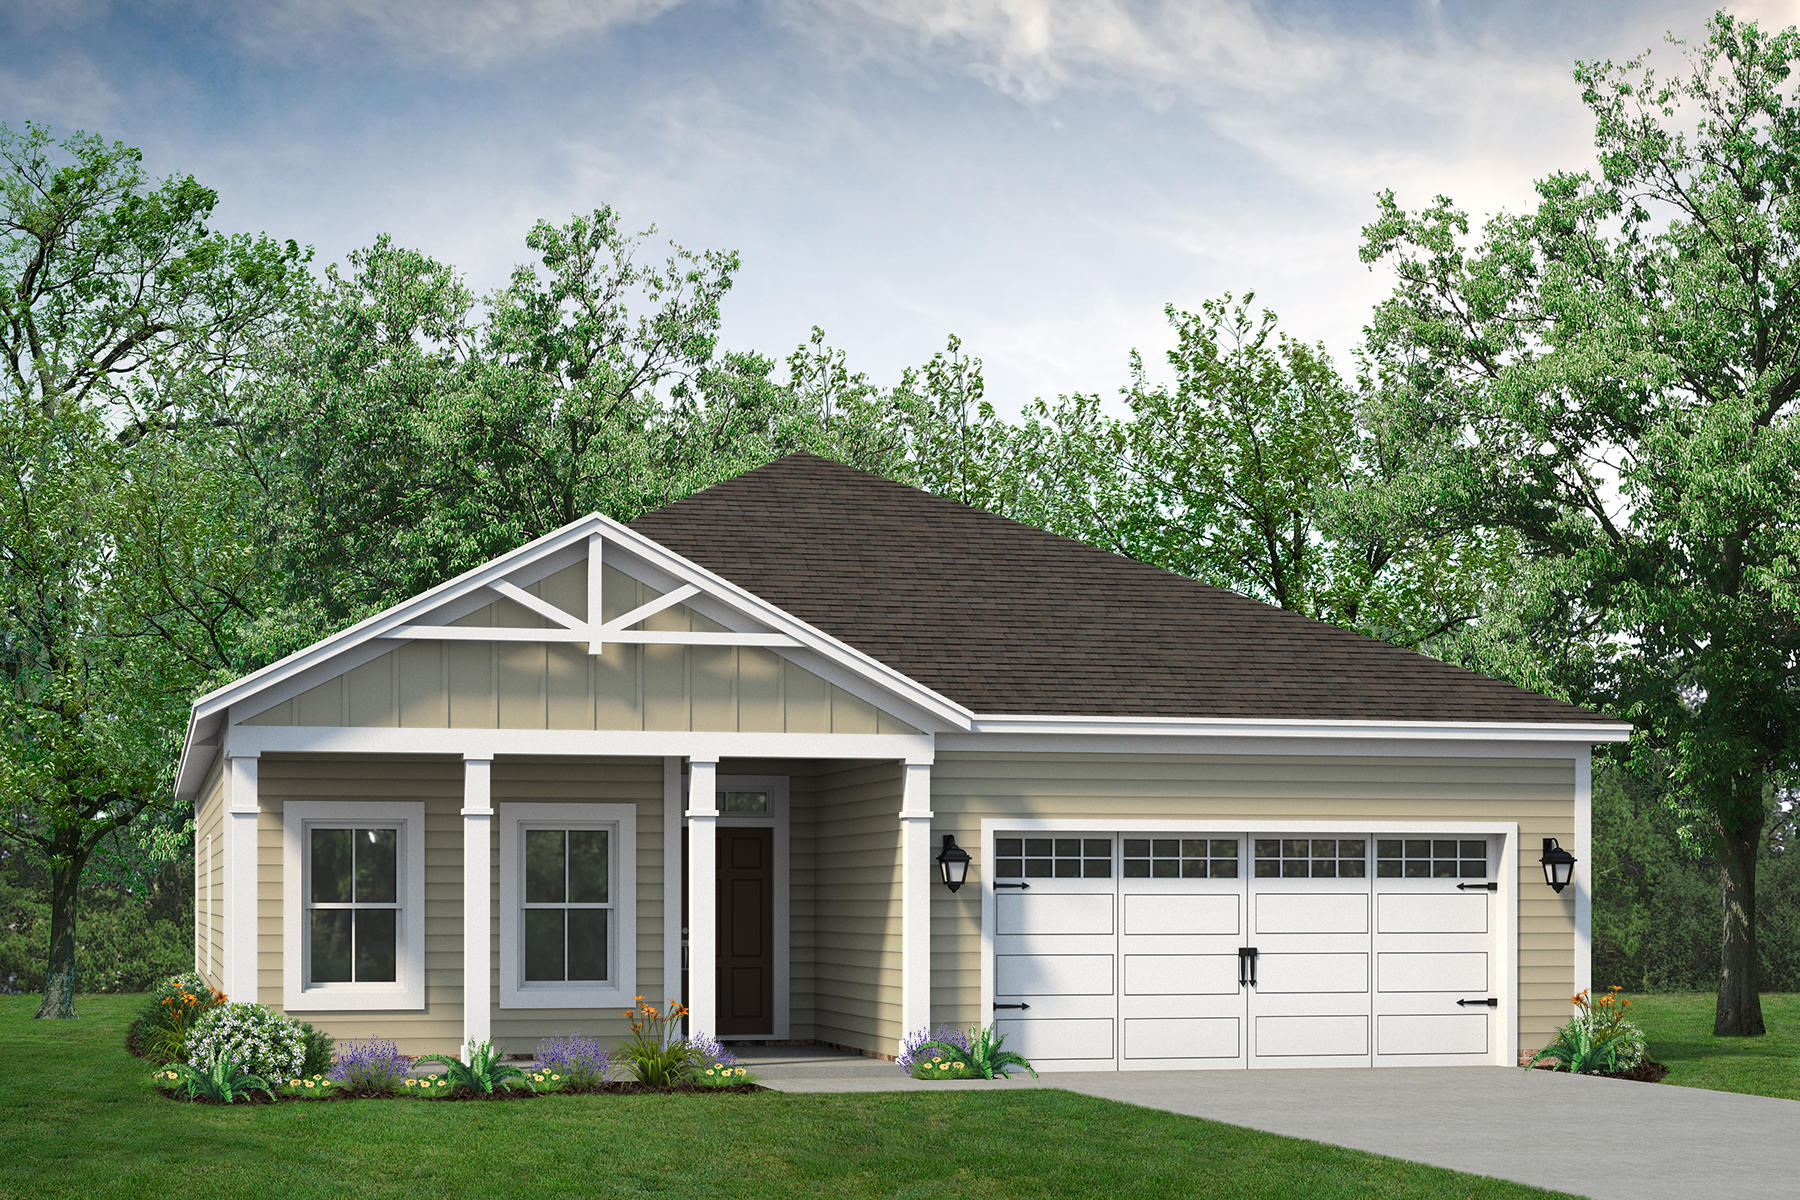 Elevation F. 1,846sf New Home in Lillington, NC